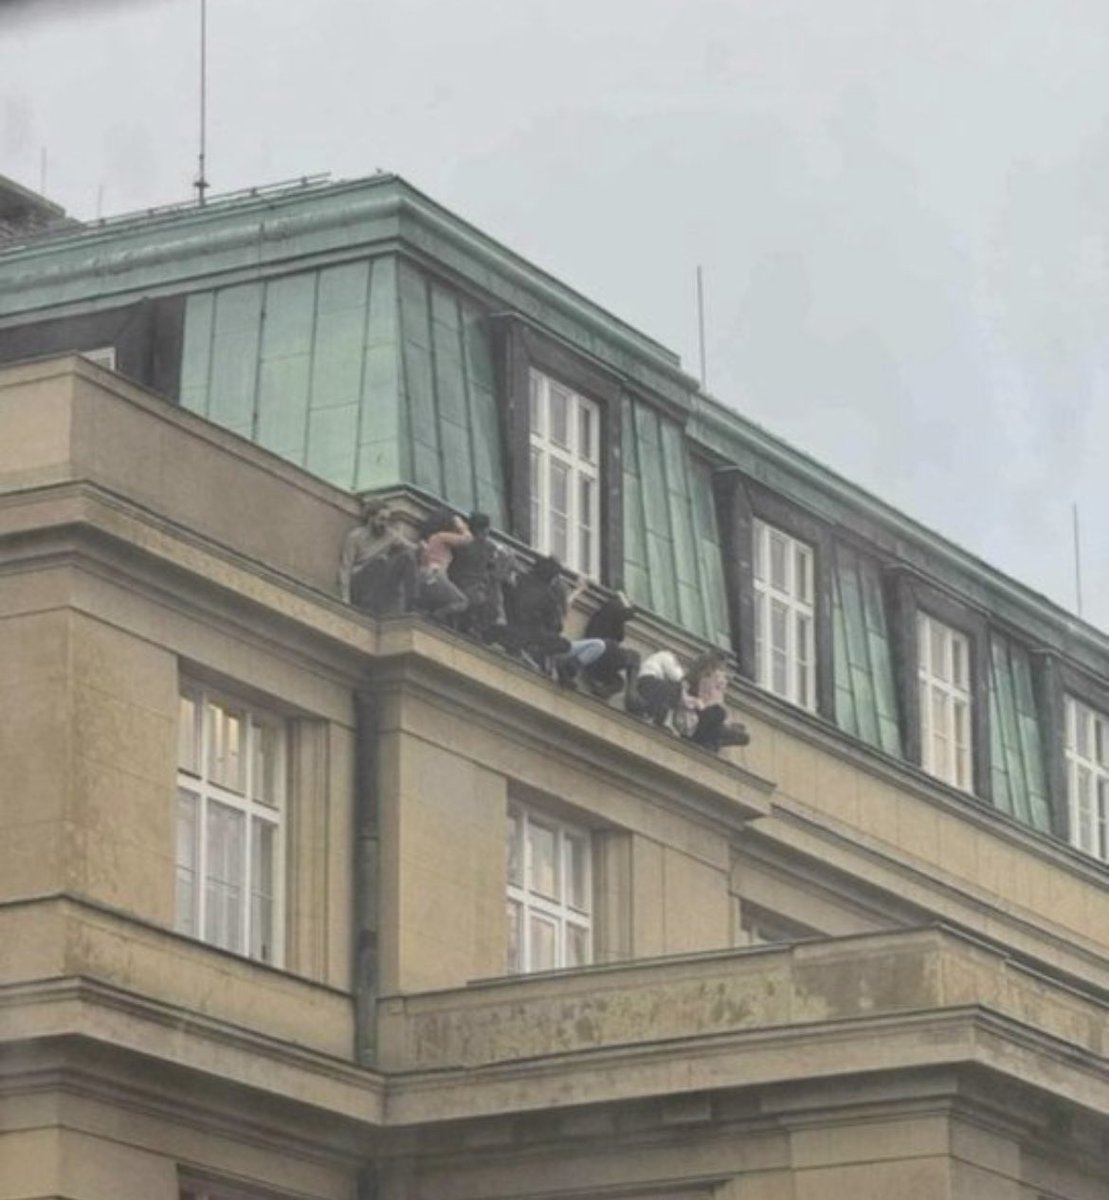 Students hiding during a shooting at Charles University in Prague, Czech Republic, earlier today.